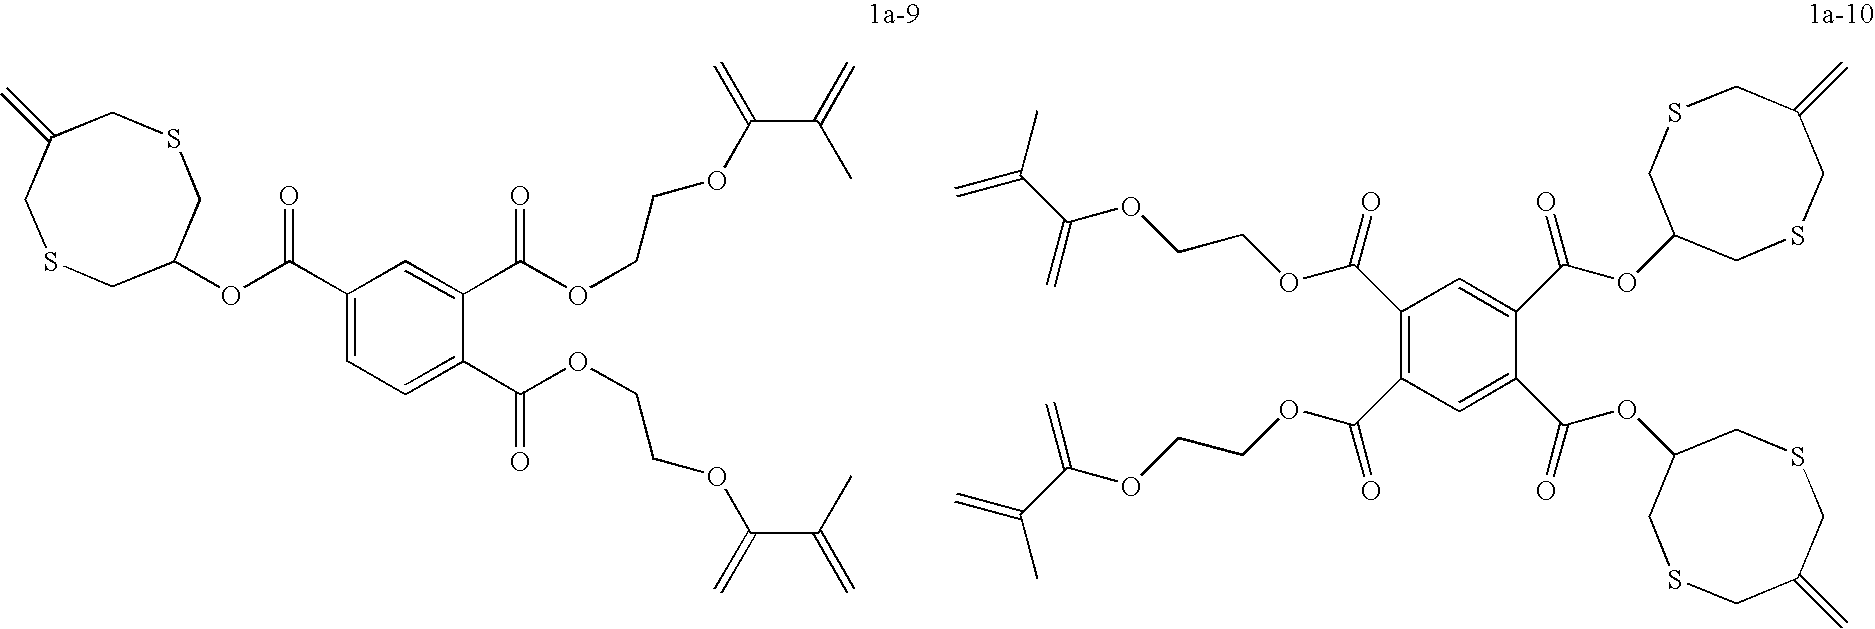 Dental compositions containing hybrid monomers